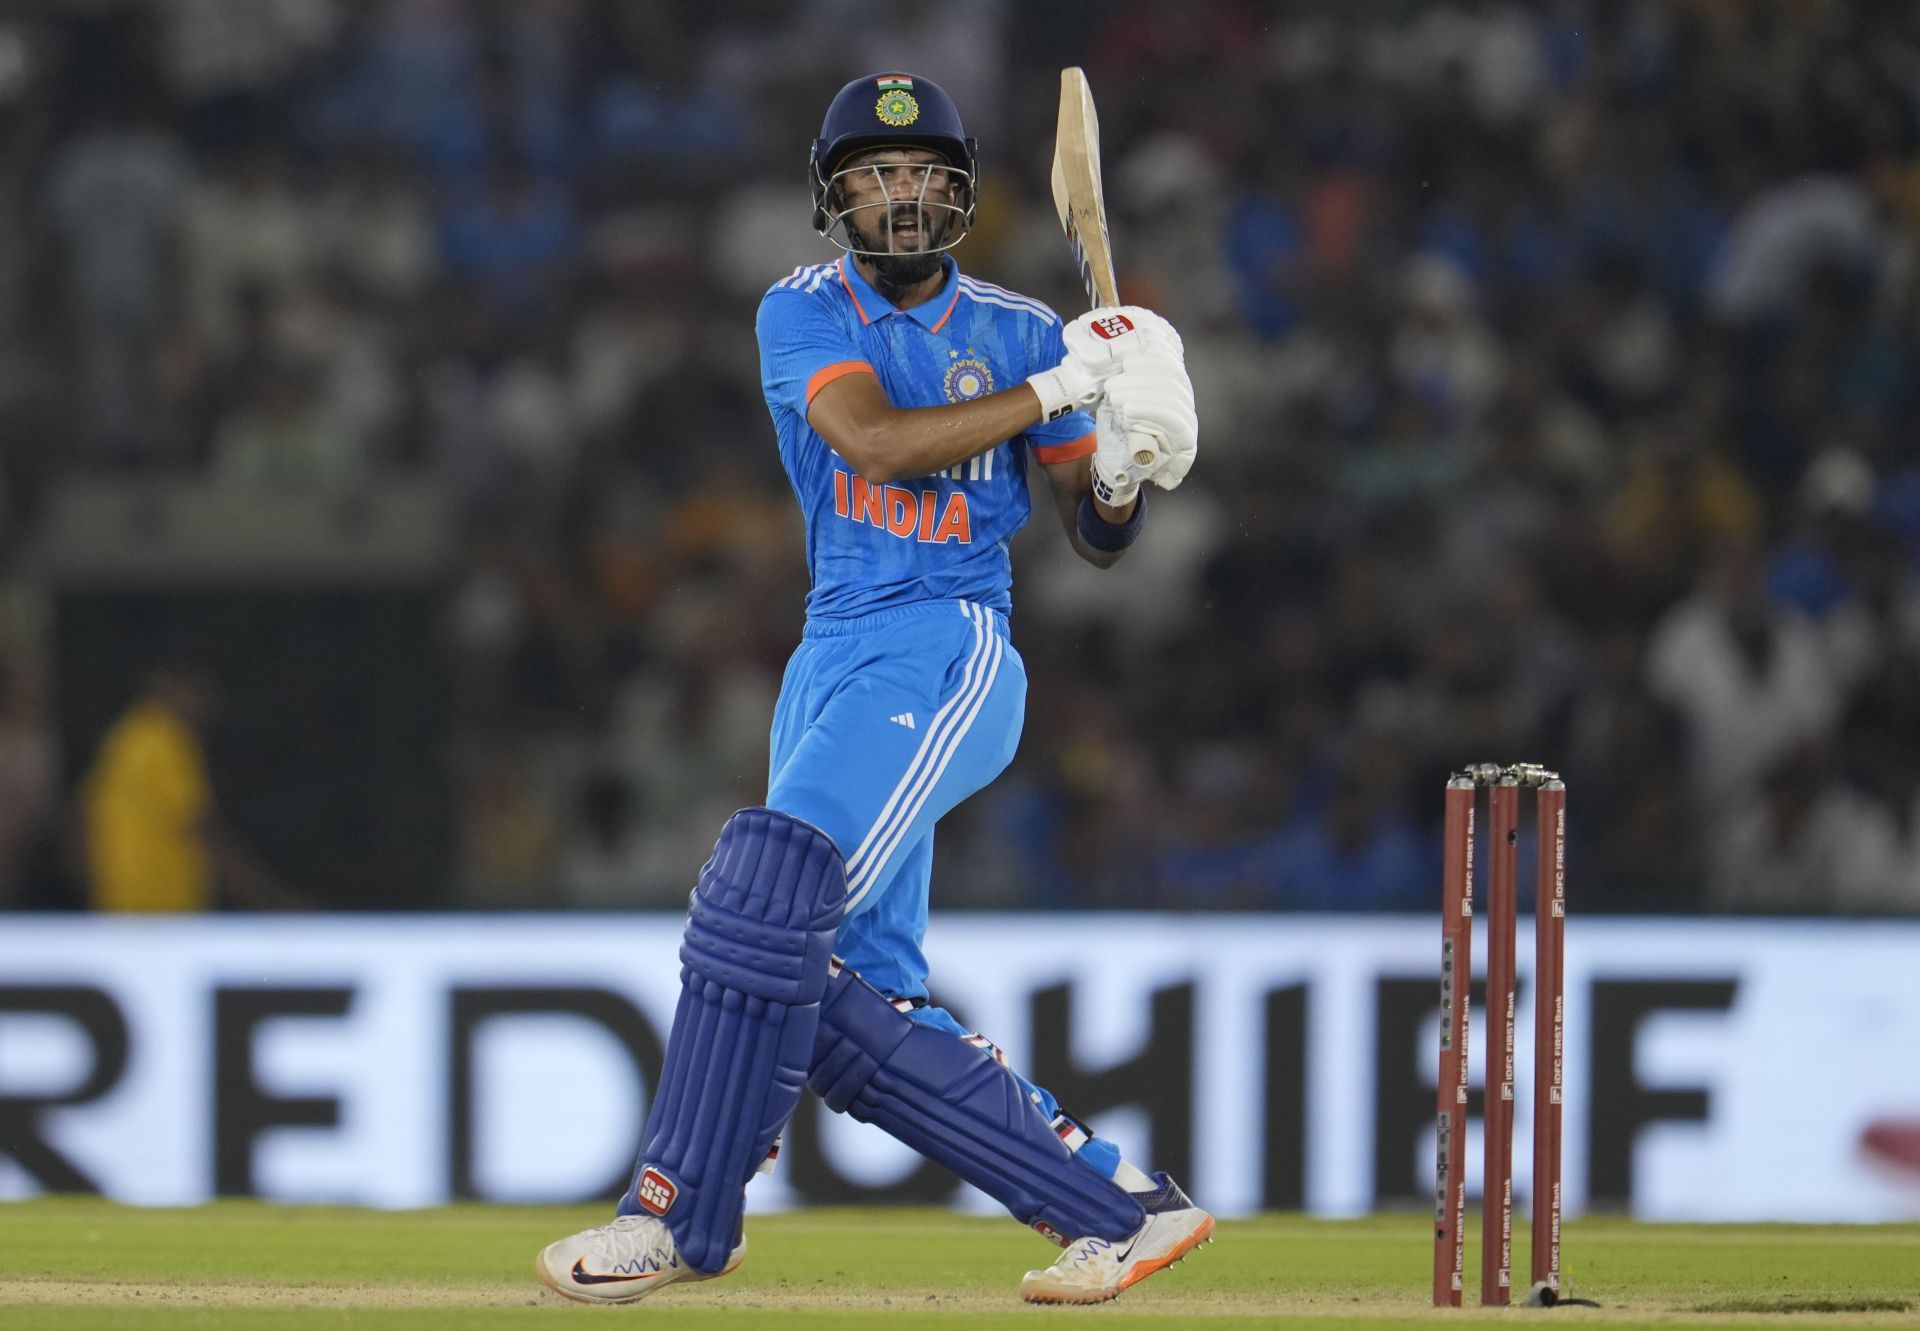 Ruturaj Gaikwad played some delectable shots in his maiden ODI half-century